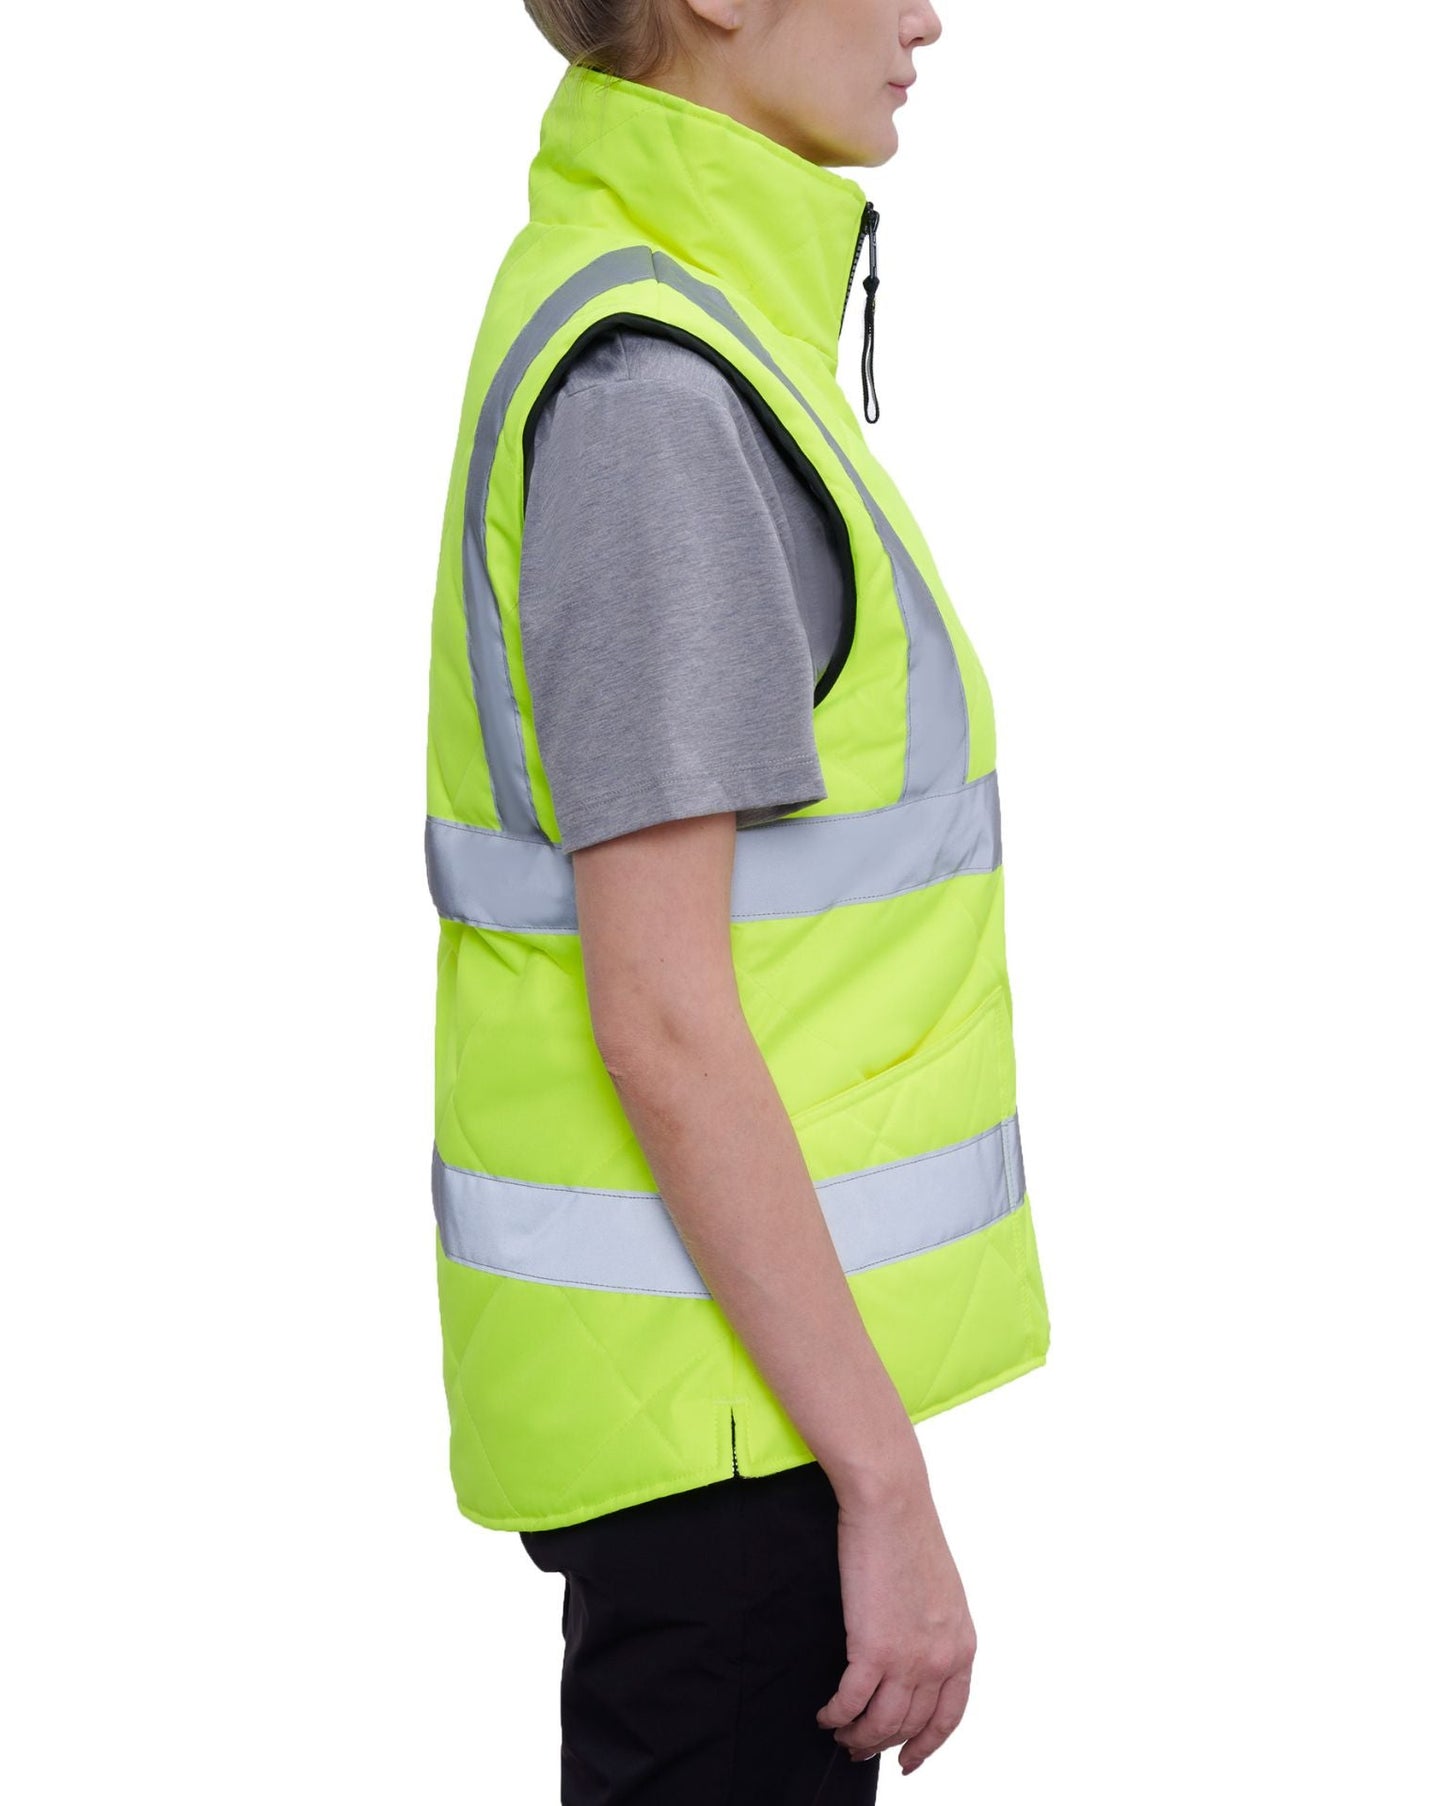 UHV995 HiVis Women's High Collar WarmUP Insulated Safety Vest